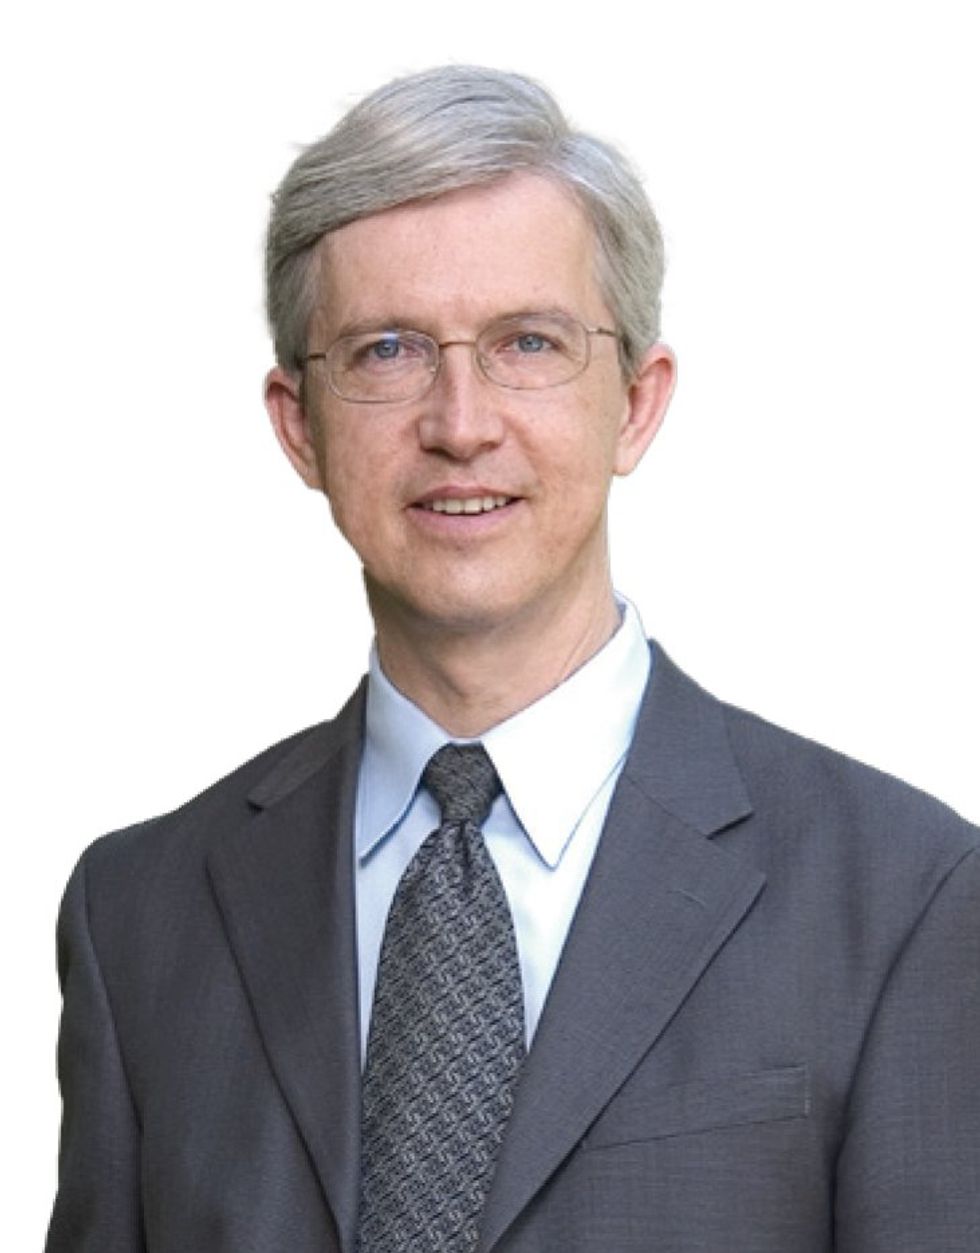 A headshot of a silver-haired man in a suit and glasses.